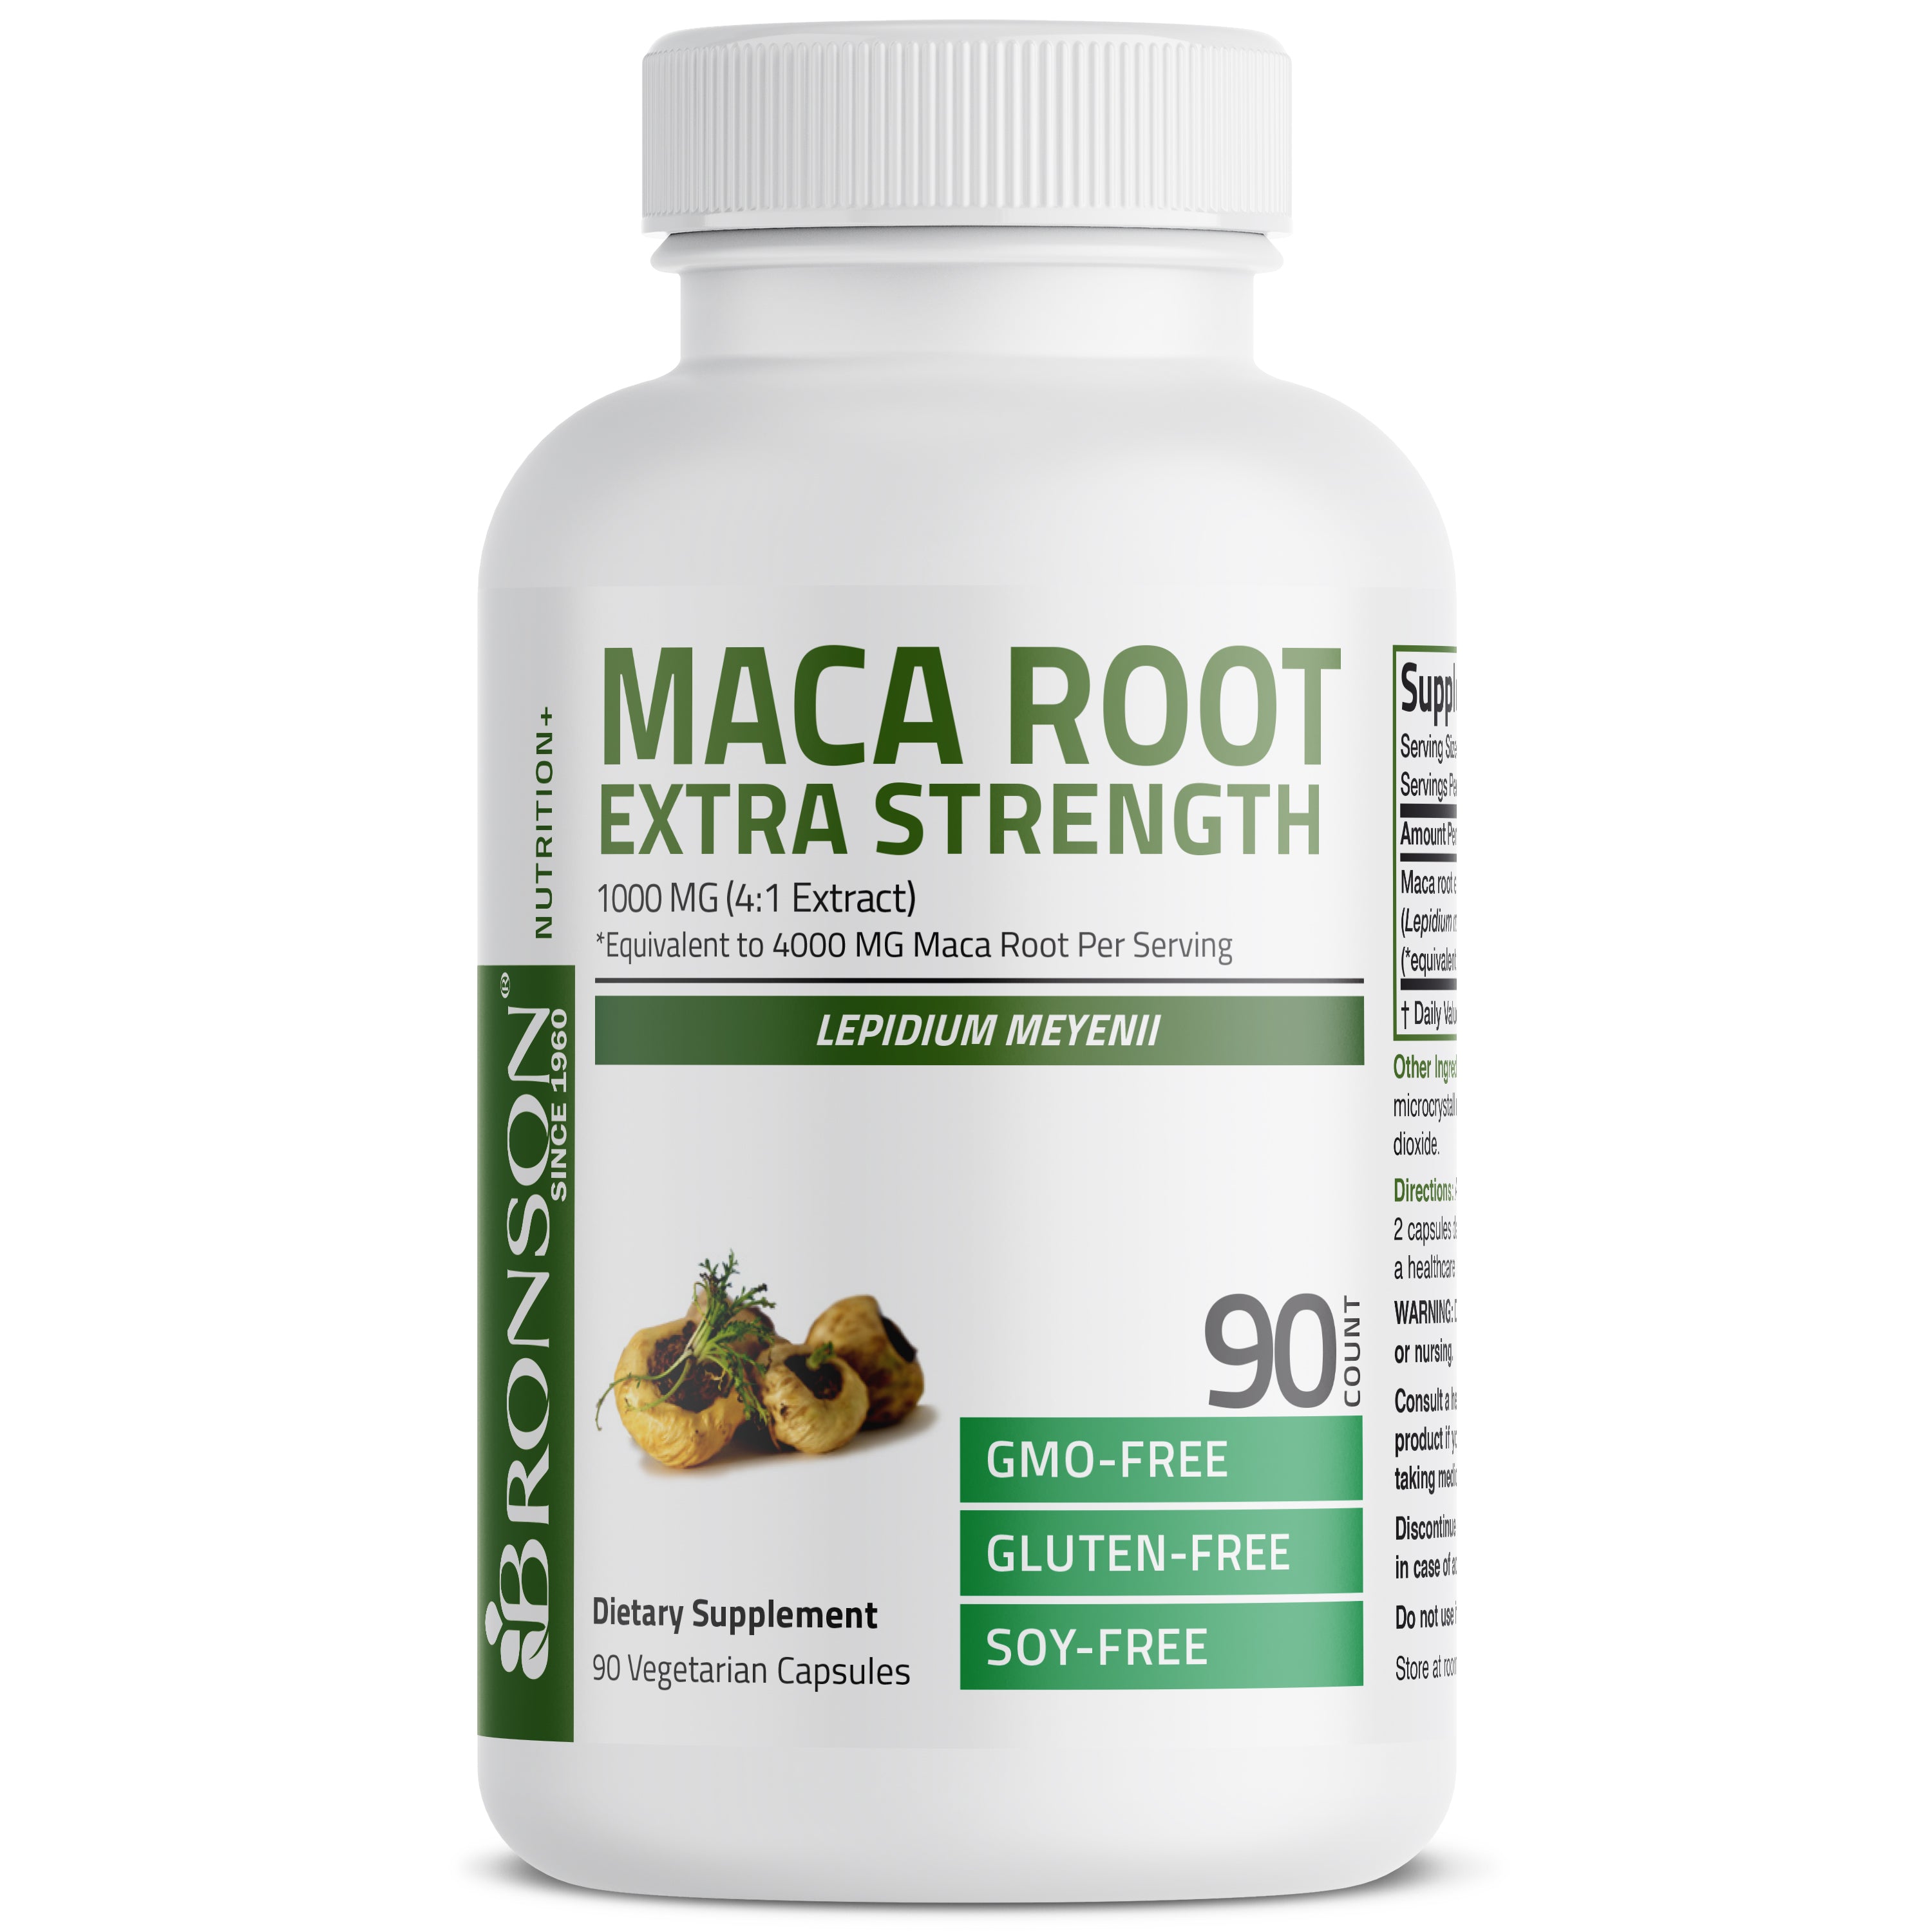 Maca Root Extra Strength 4000 MG per Serving view 9 of 6